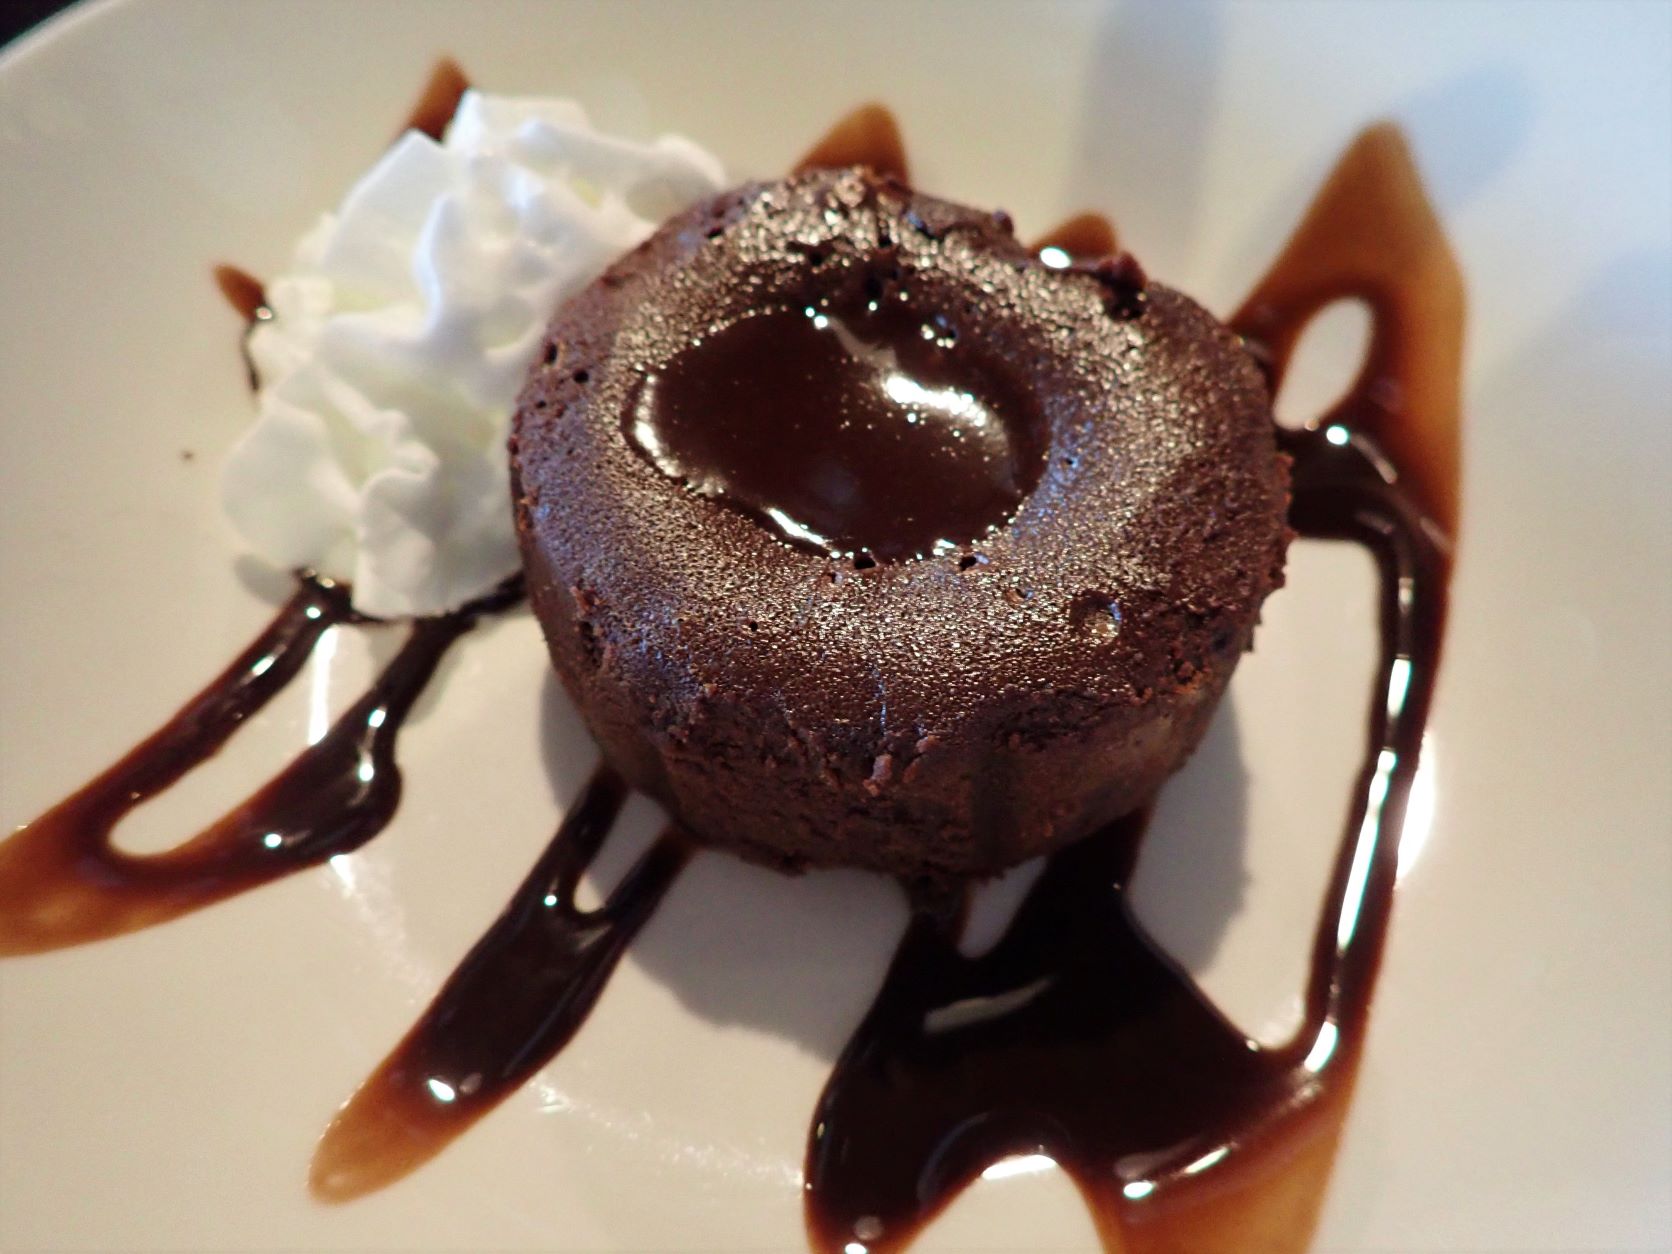 Hot lava cake at The Fusion in Frankfort, Michigan